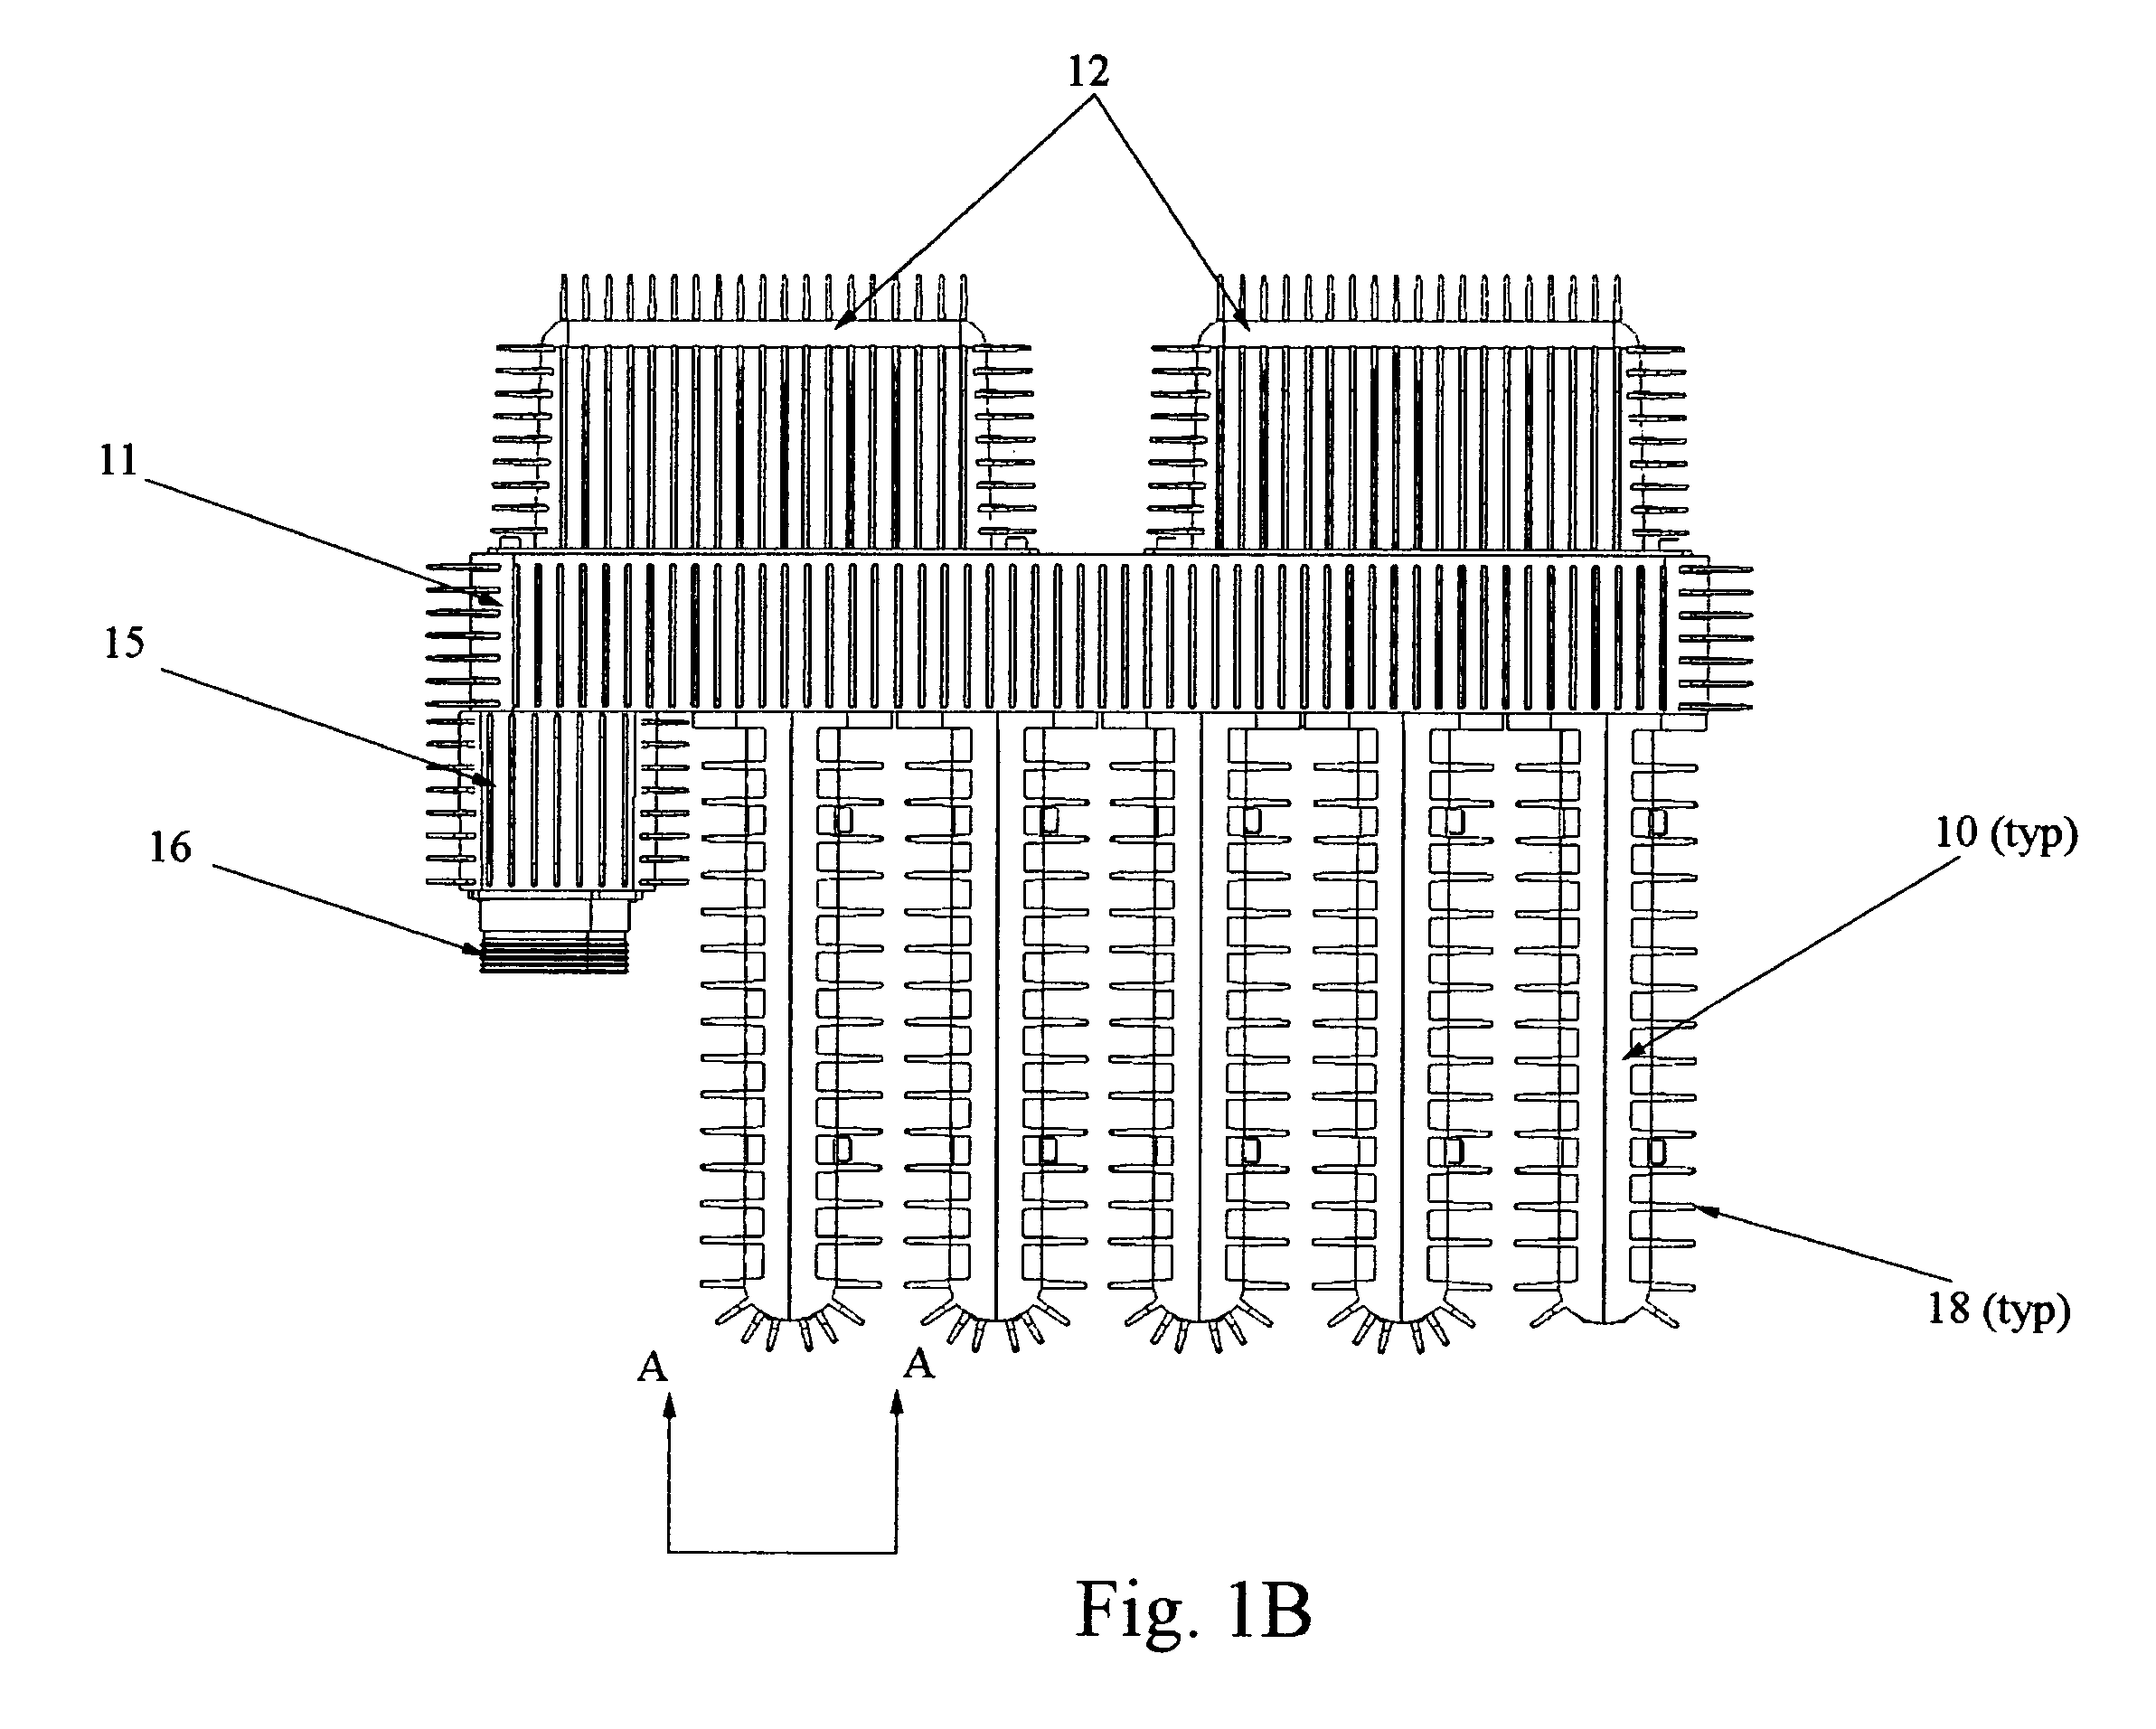 Machine for passively removing heat generated by an electronic circuit board